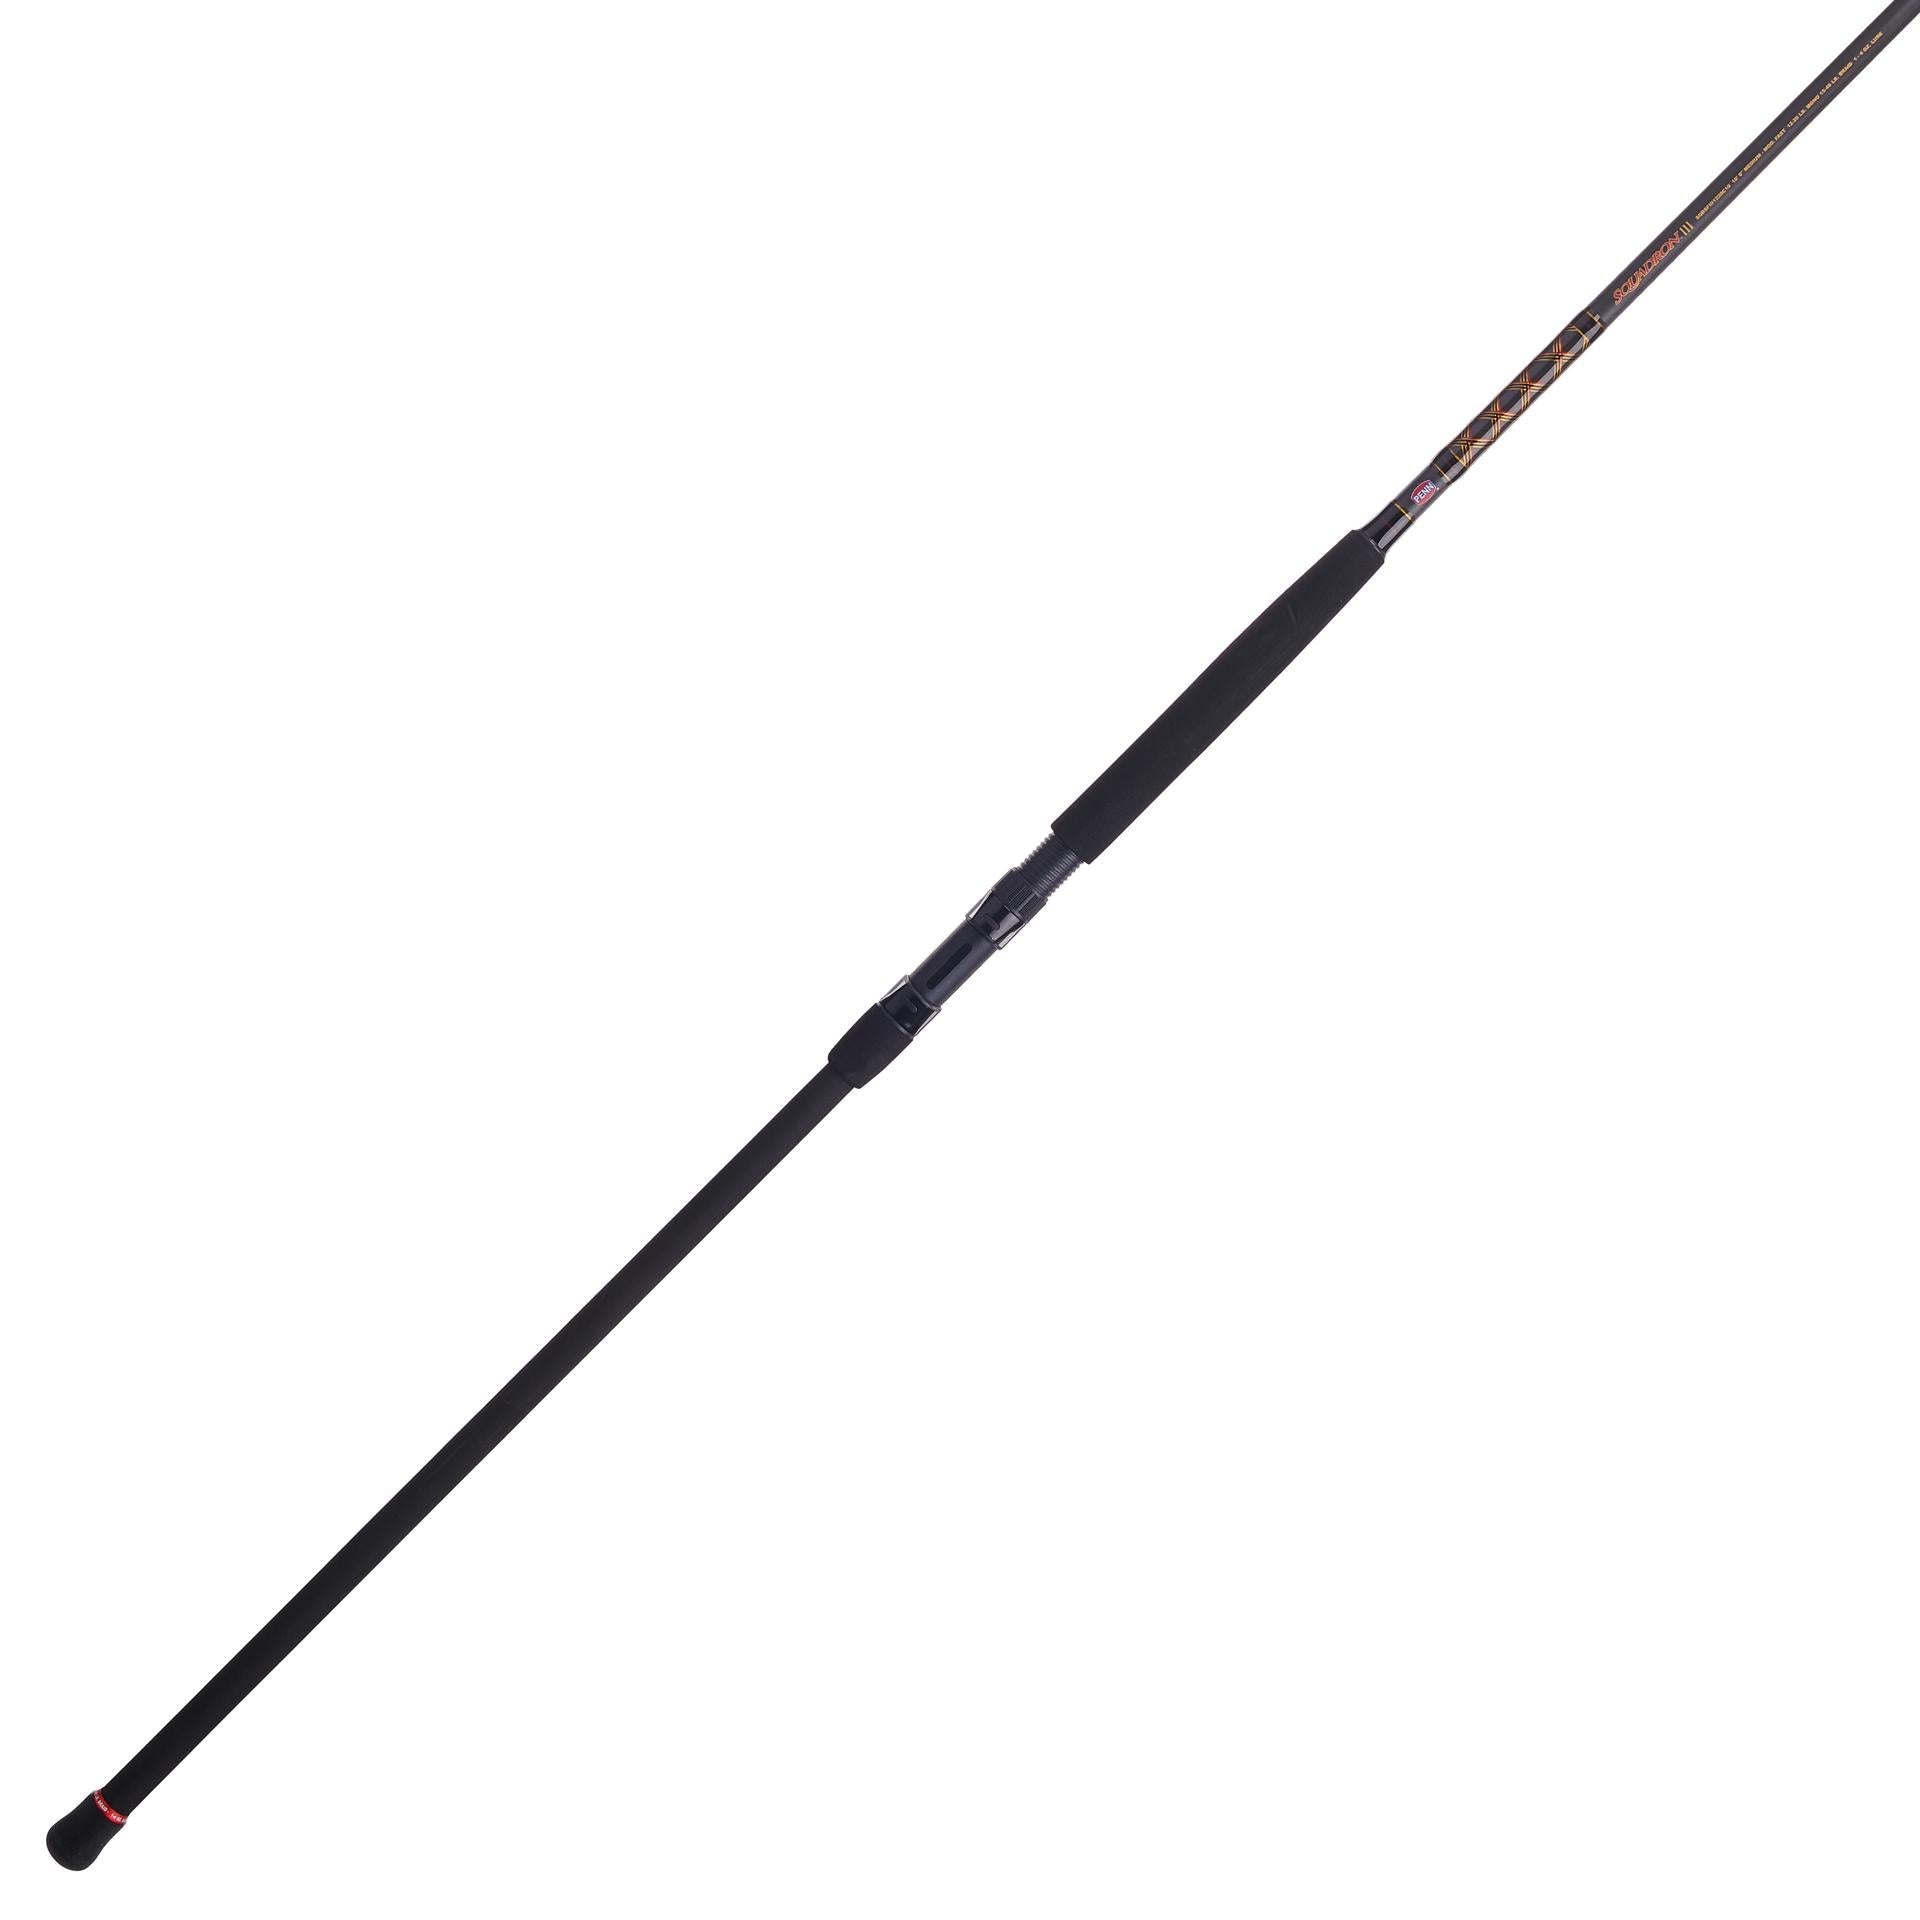 DEAL OF THE DAY - PENN SQUALL® II SIZE 50 LEVEL WIND & RAPALA R-TYPE 5'2  (PE 4-6) 1PC $199.99!!!